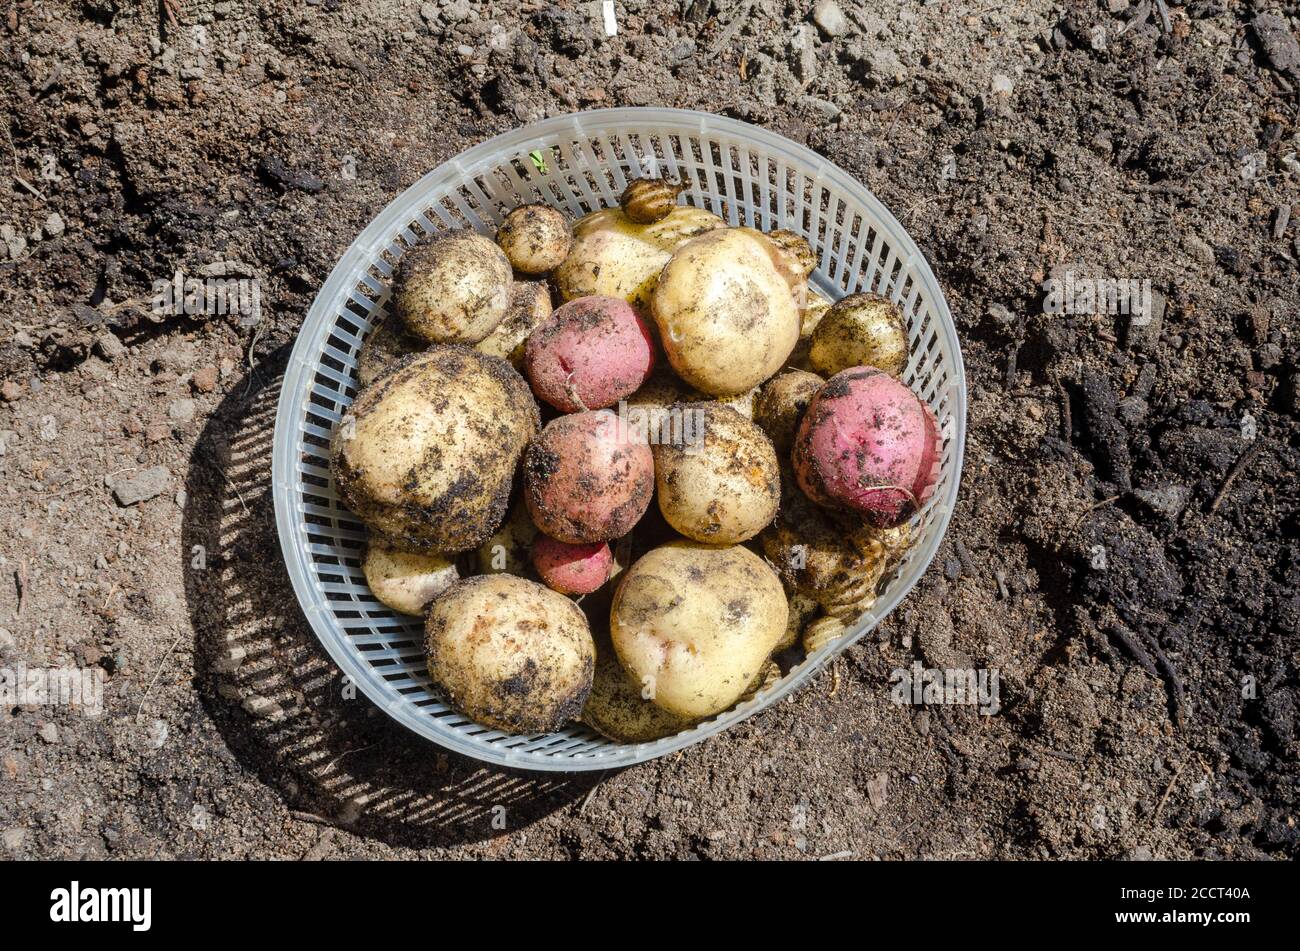 Basket of freshly dug white Kennebec and red Pontiac potatoes in basket in the garden Stock Photo